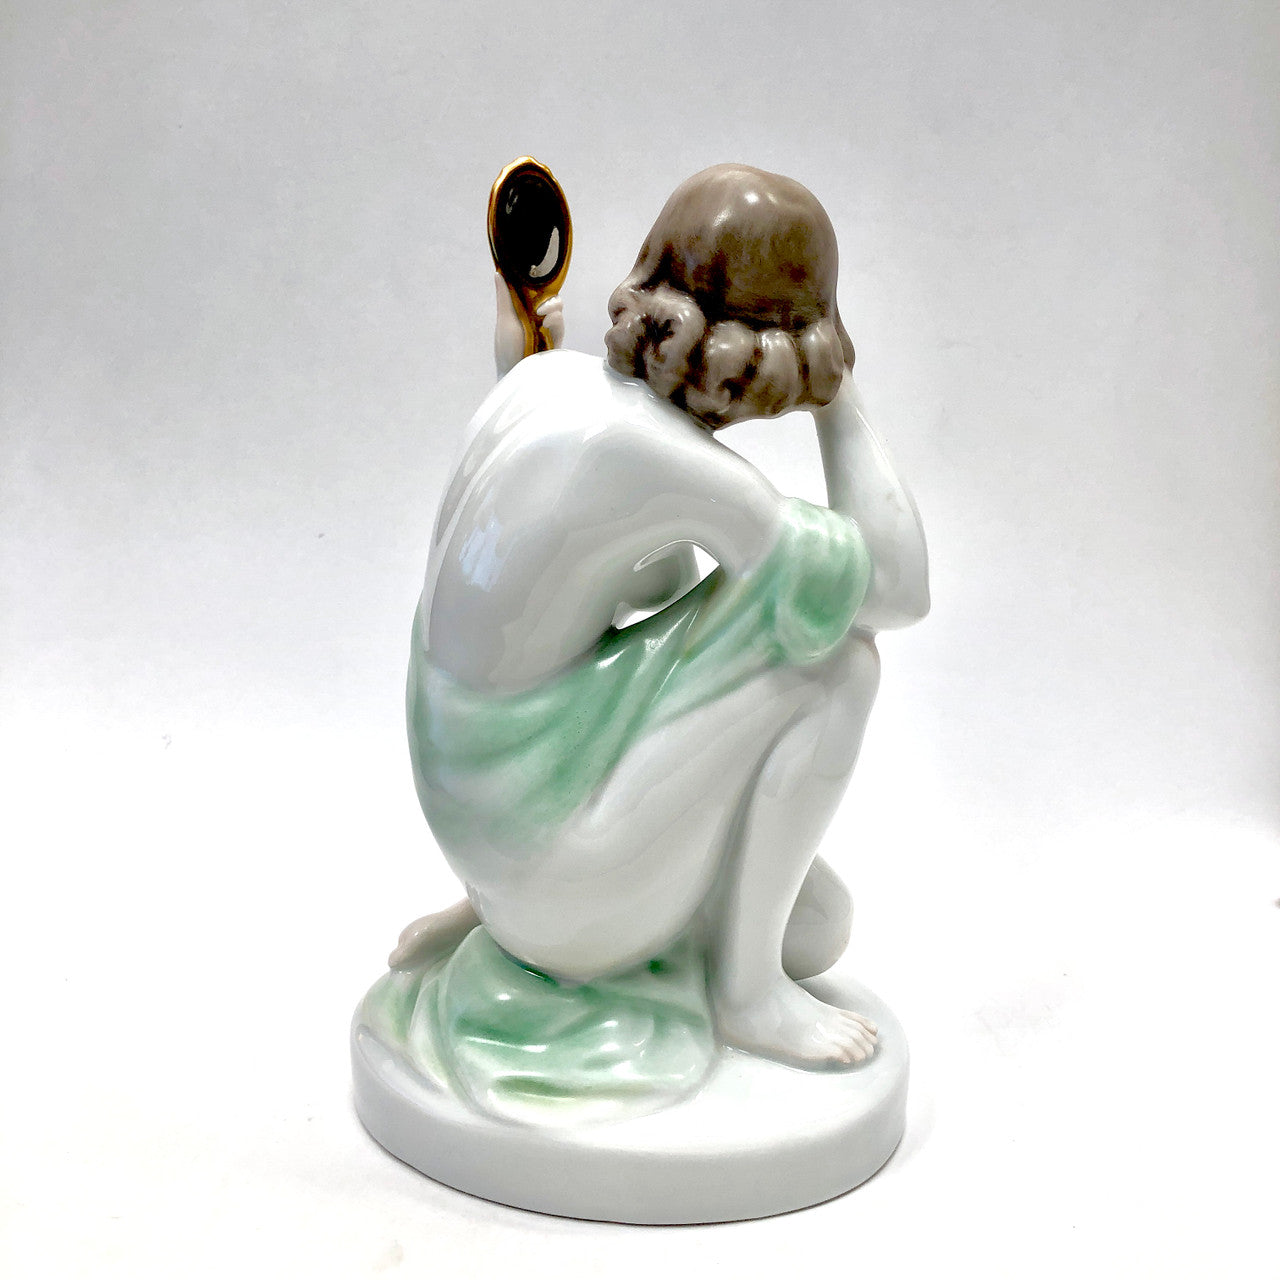 Herend, 5724, Figurine, Female, Nude, with Hand Mirror, Hungary, Porcelain, Vintage, Mid-Century,